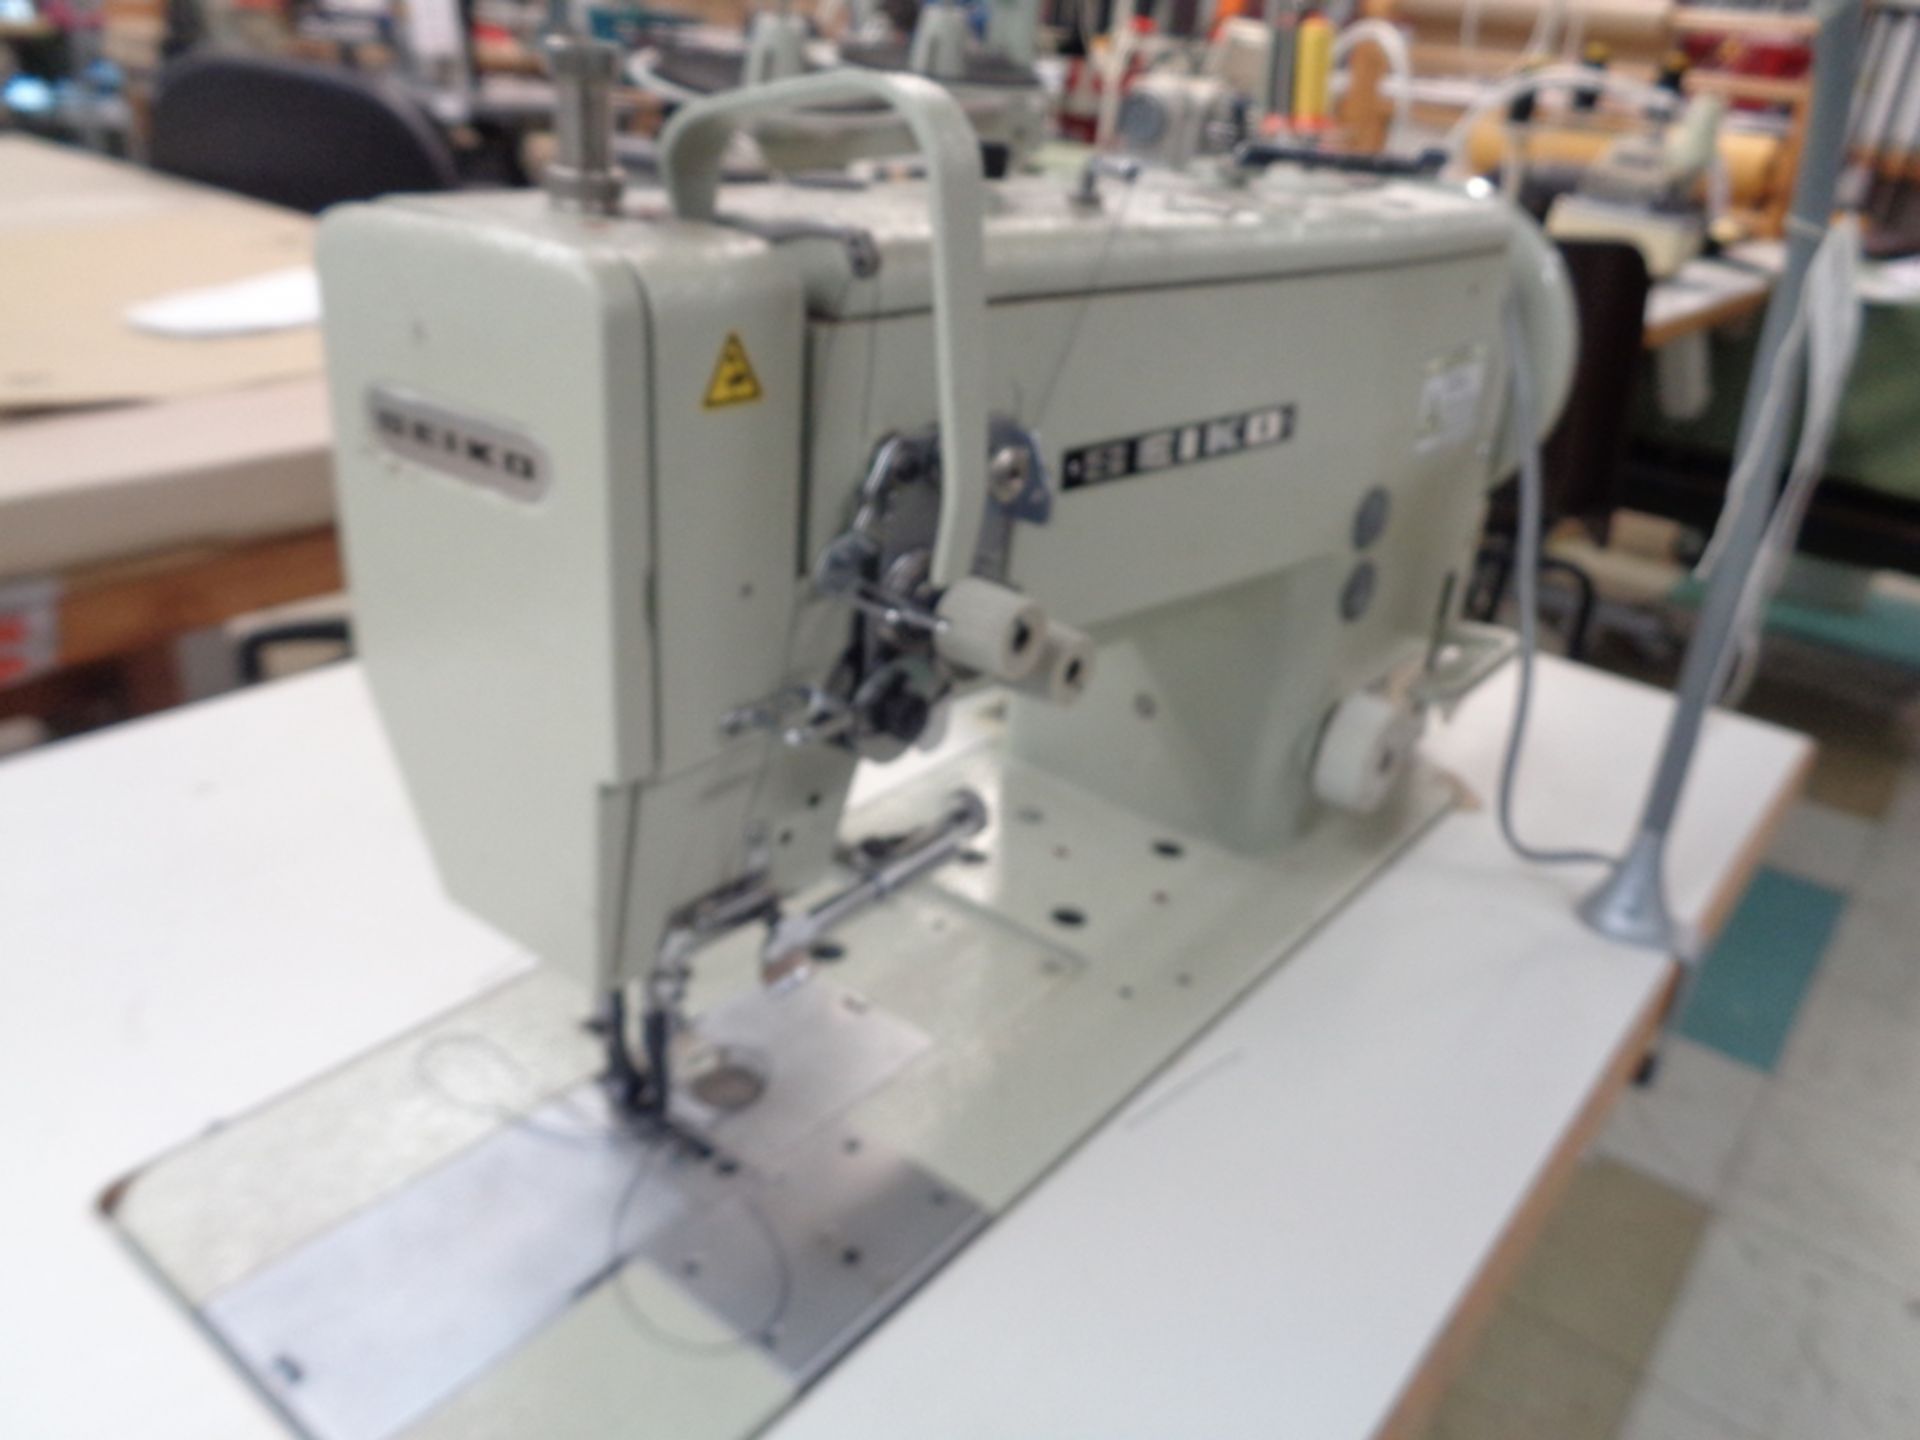 Seiko LSWN-8BL-3 high speed lockstitch sewing machine, with walking foot - Image 4 of 5